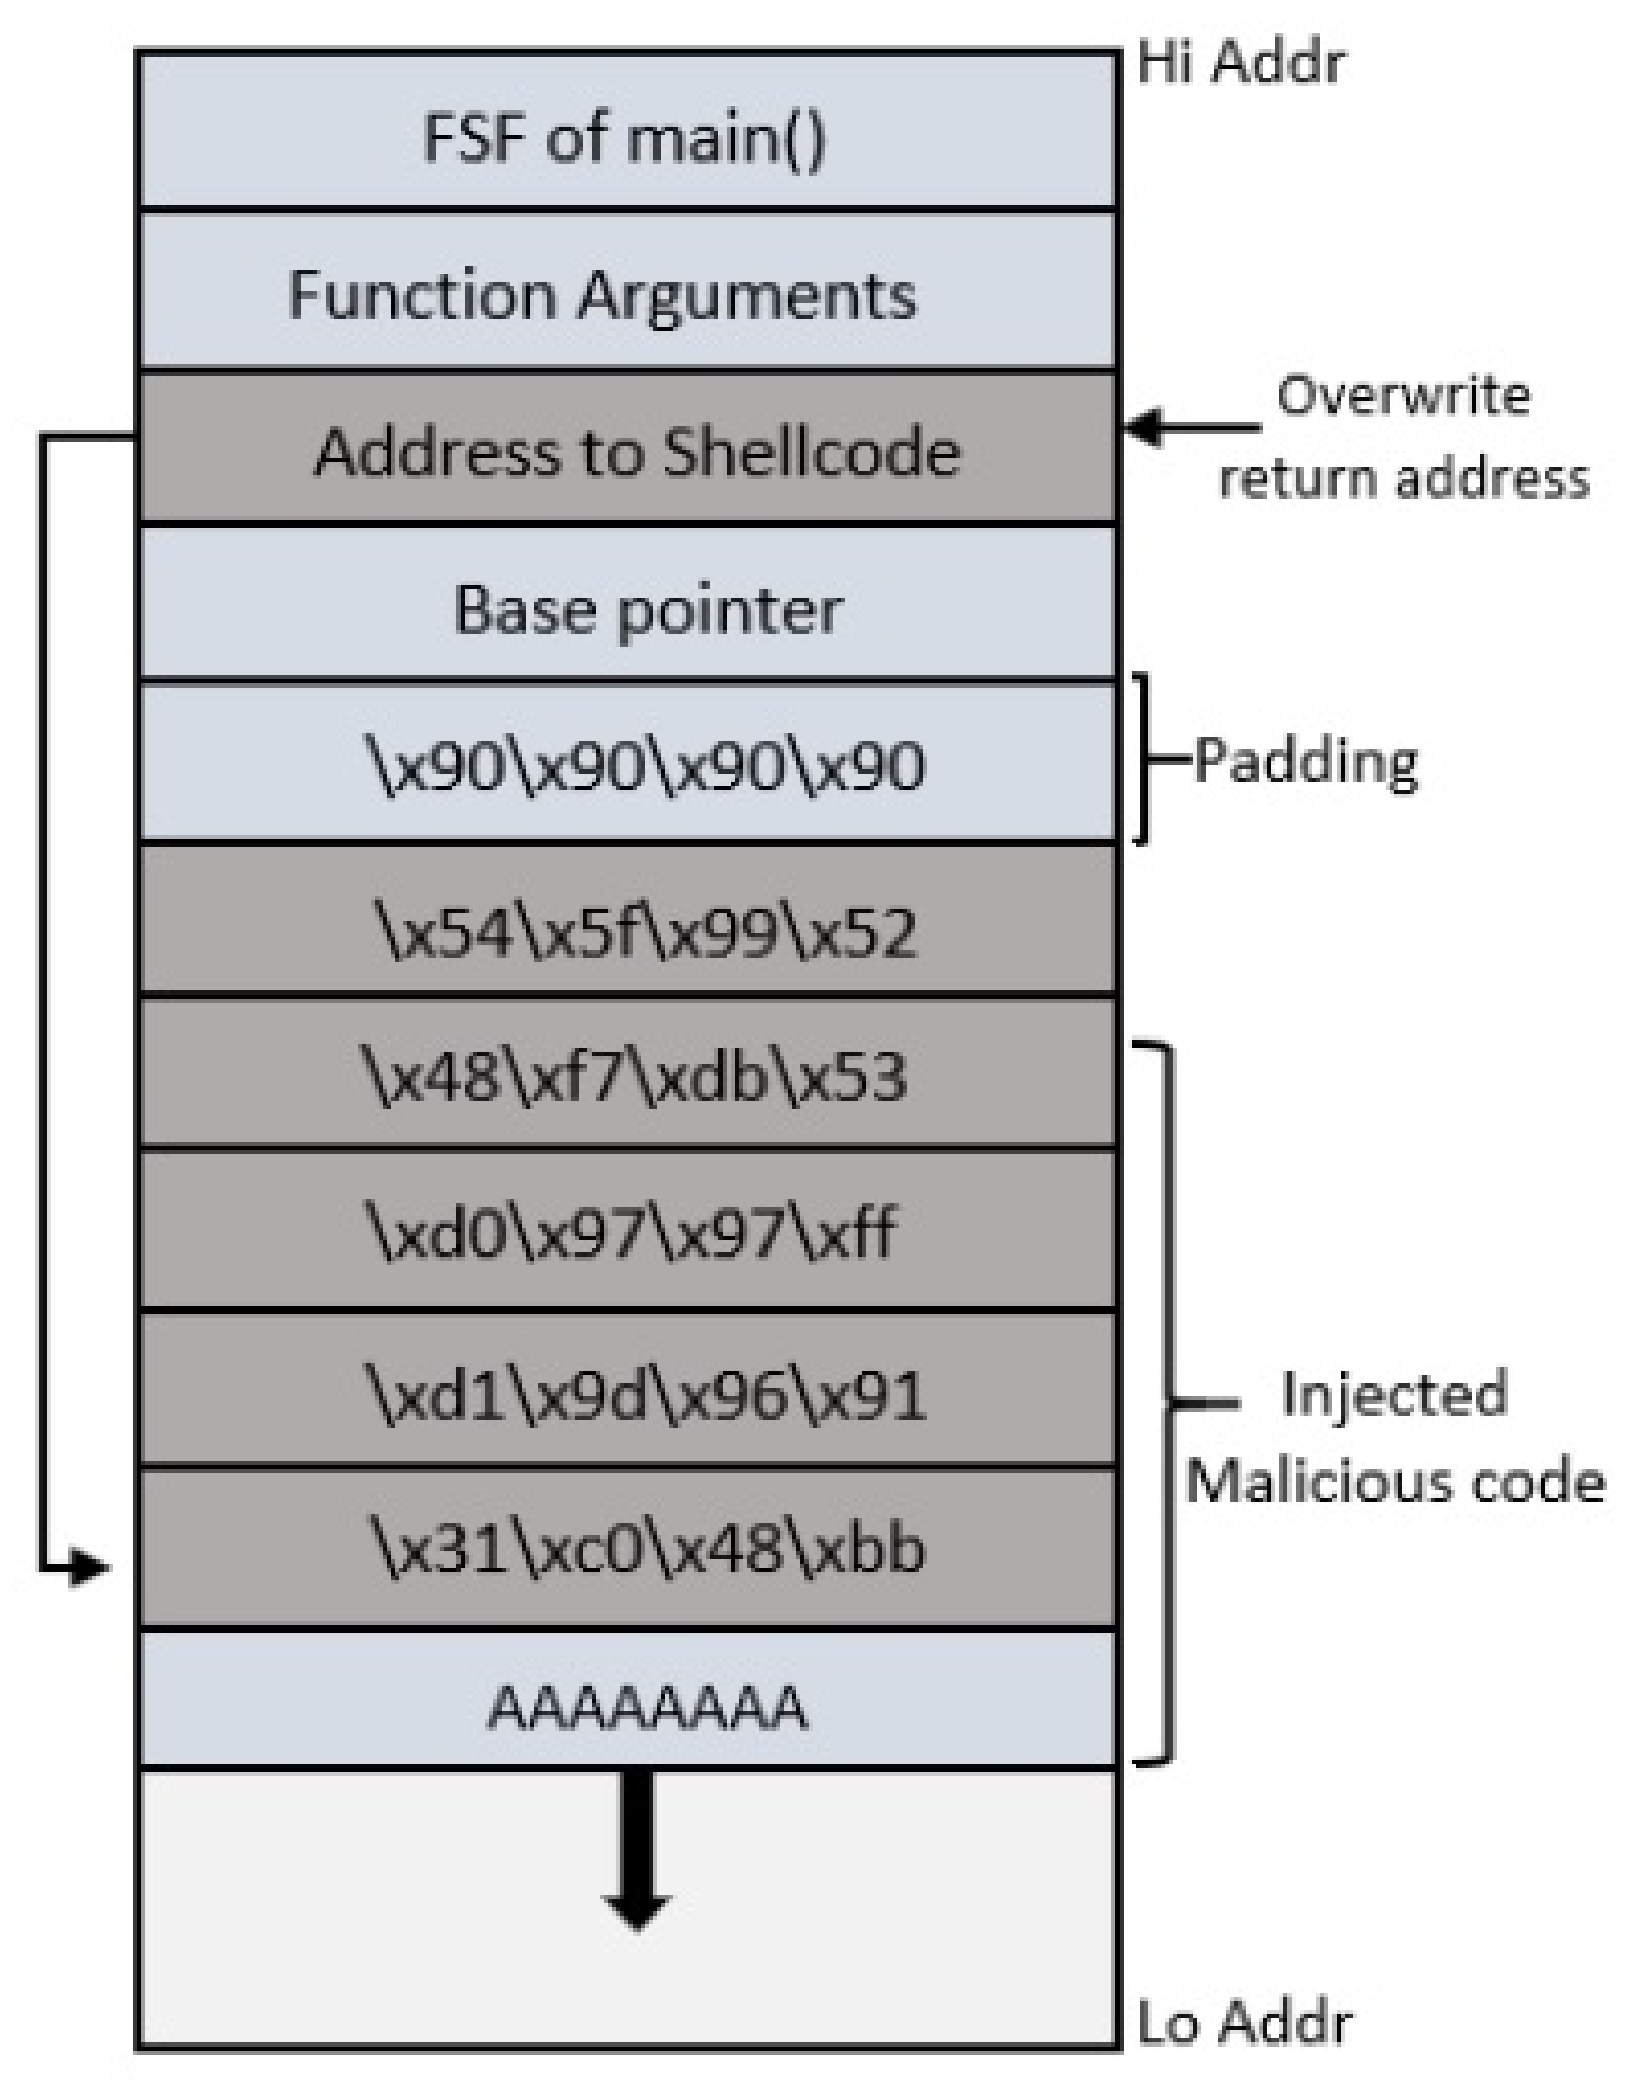 stack overflow memory